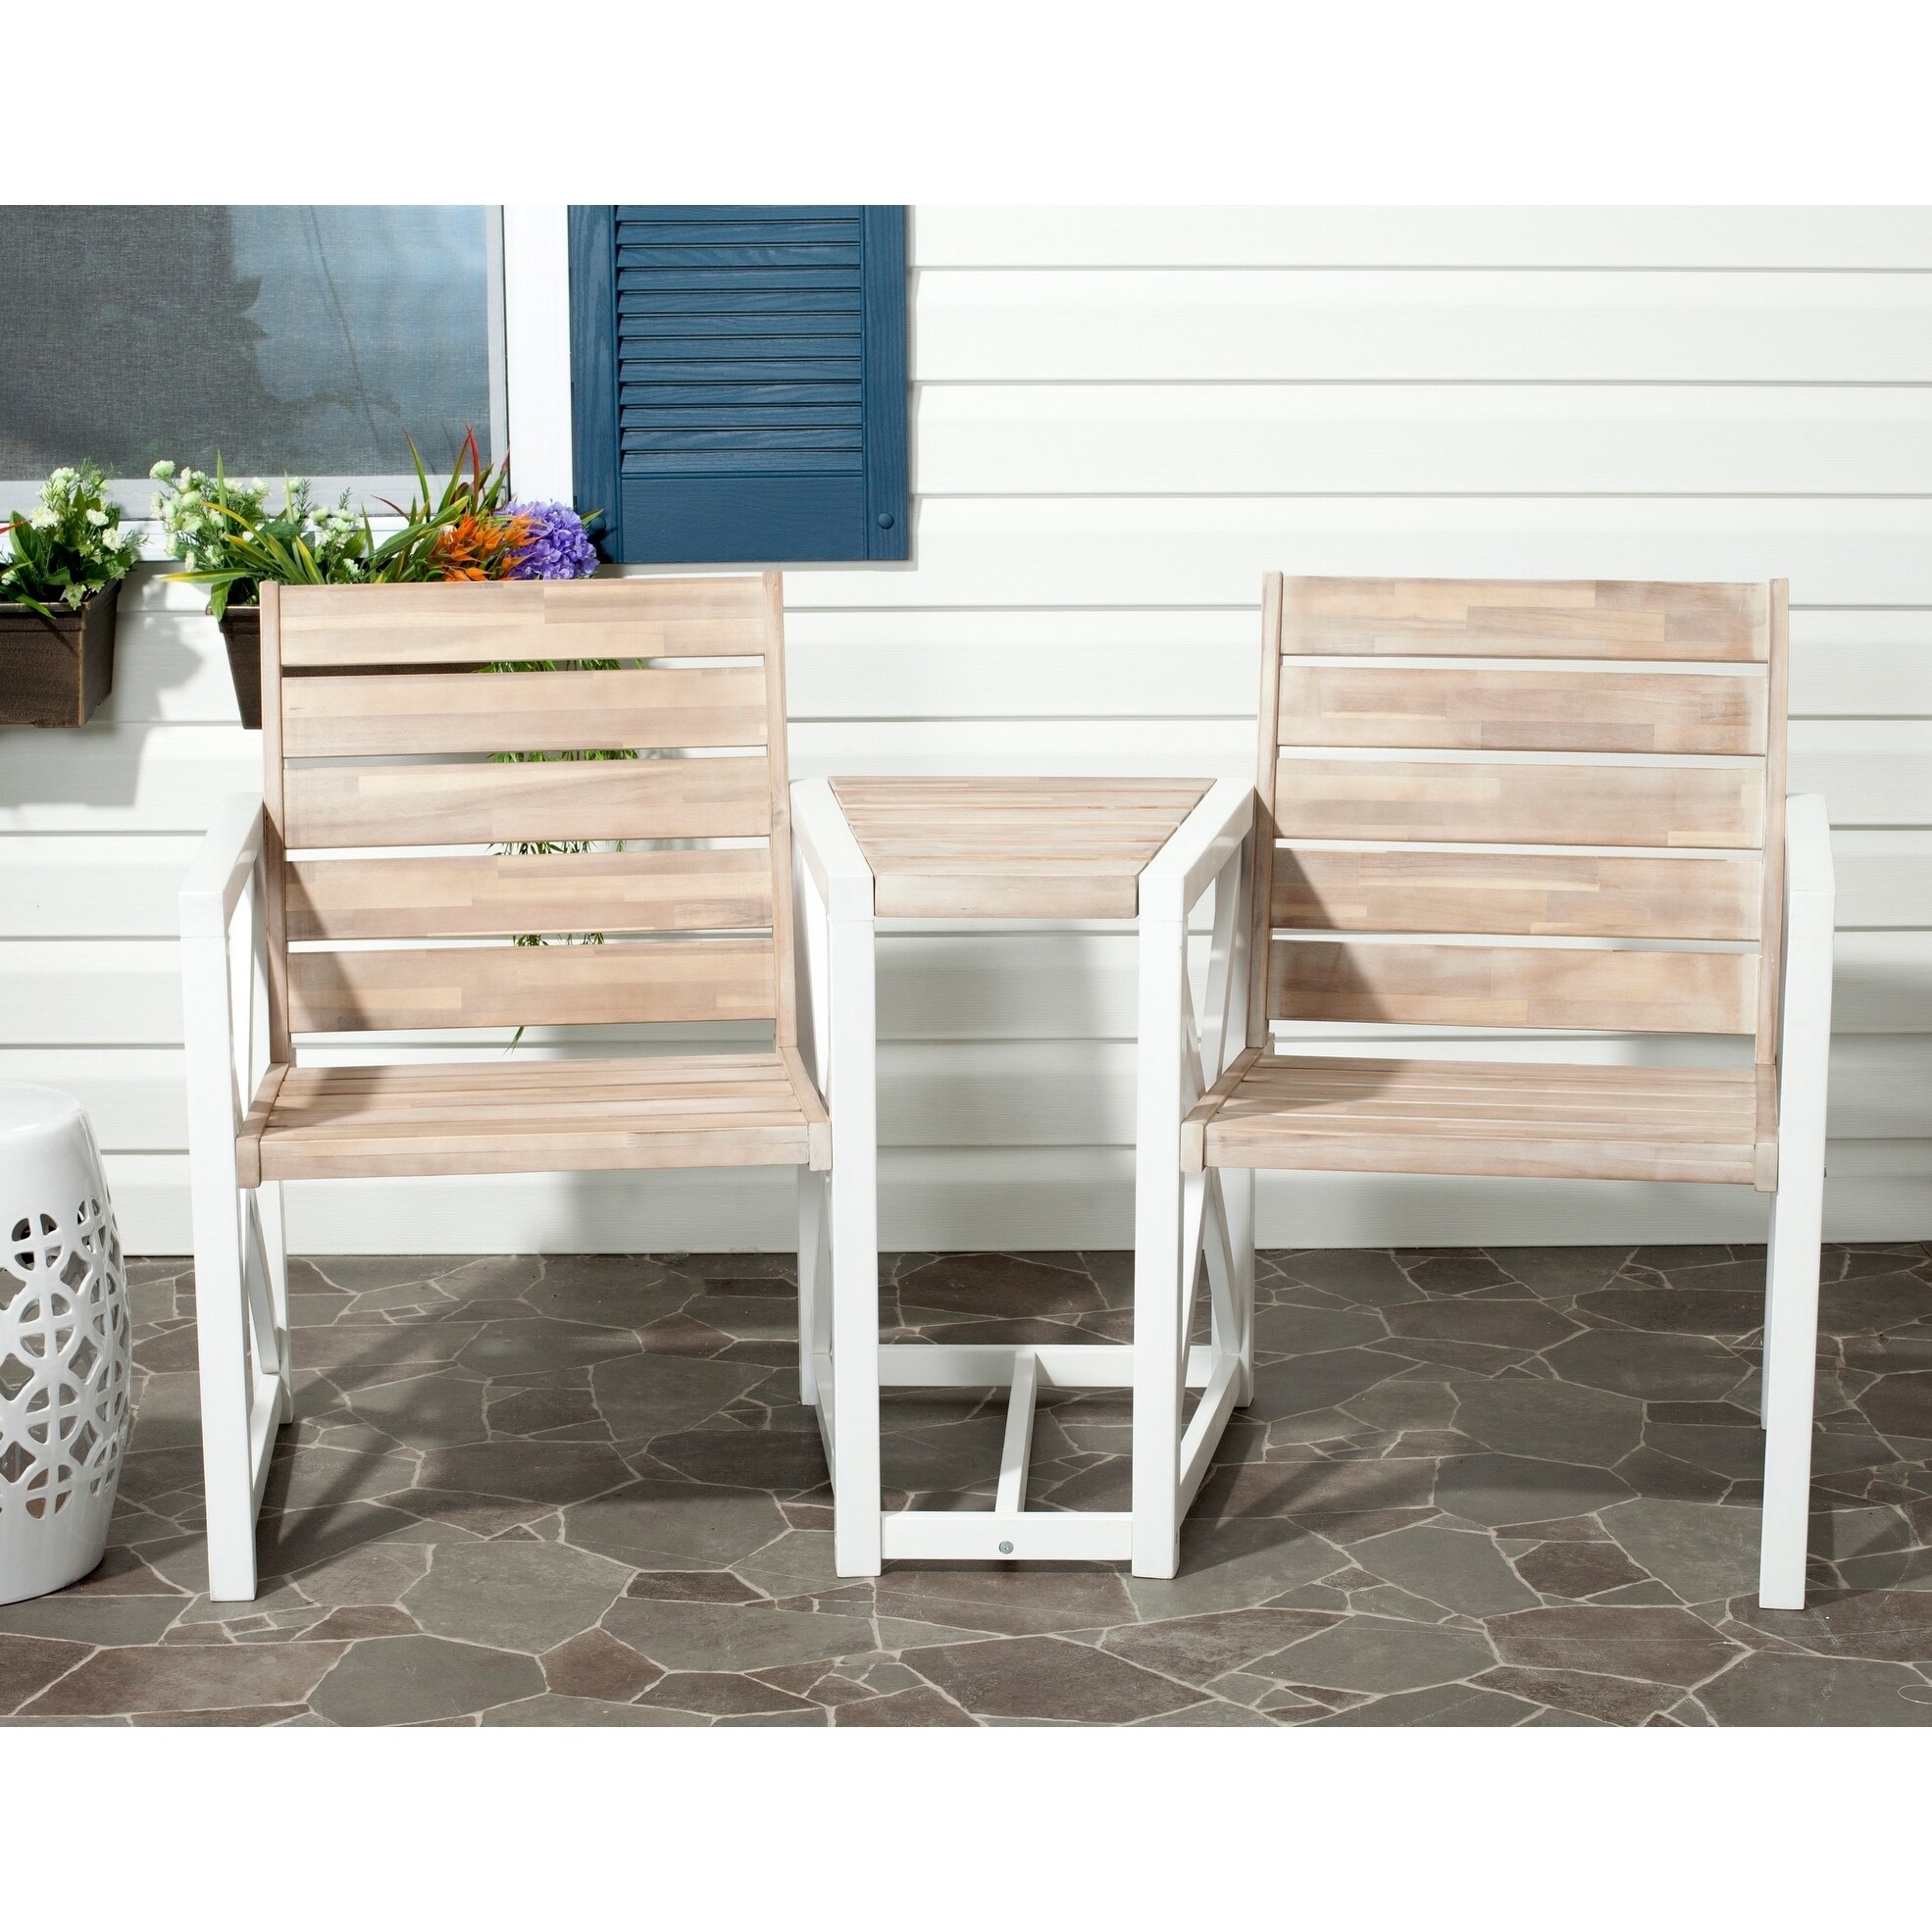 White and Oak Bench Today $330.99 Sale $297.89 Save 10%